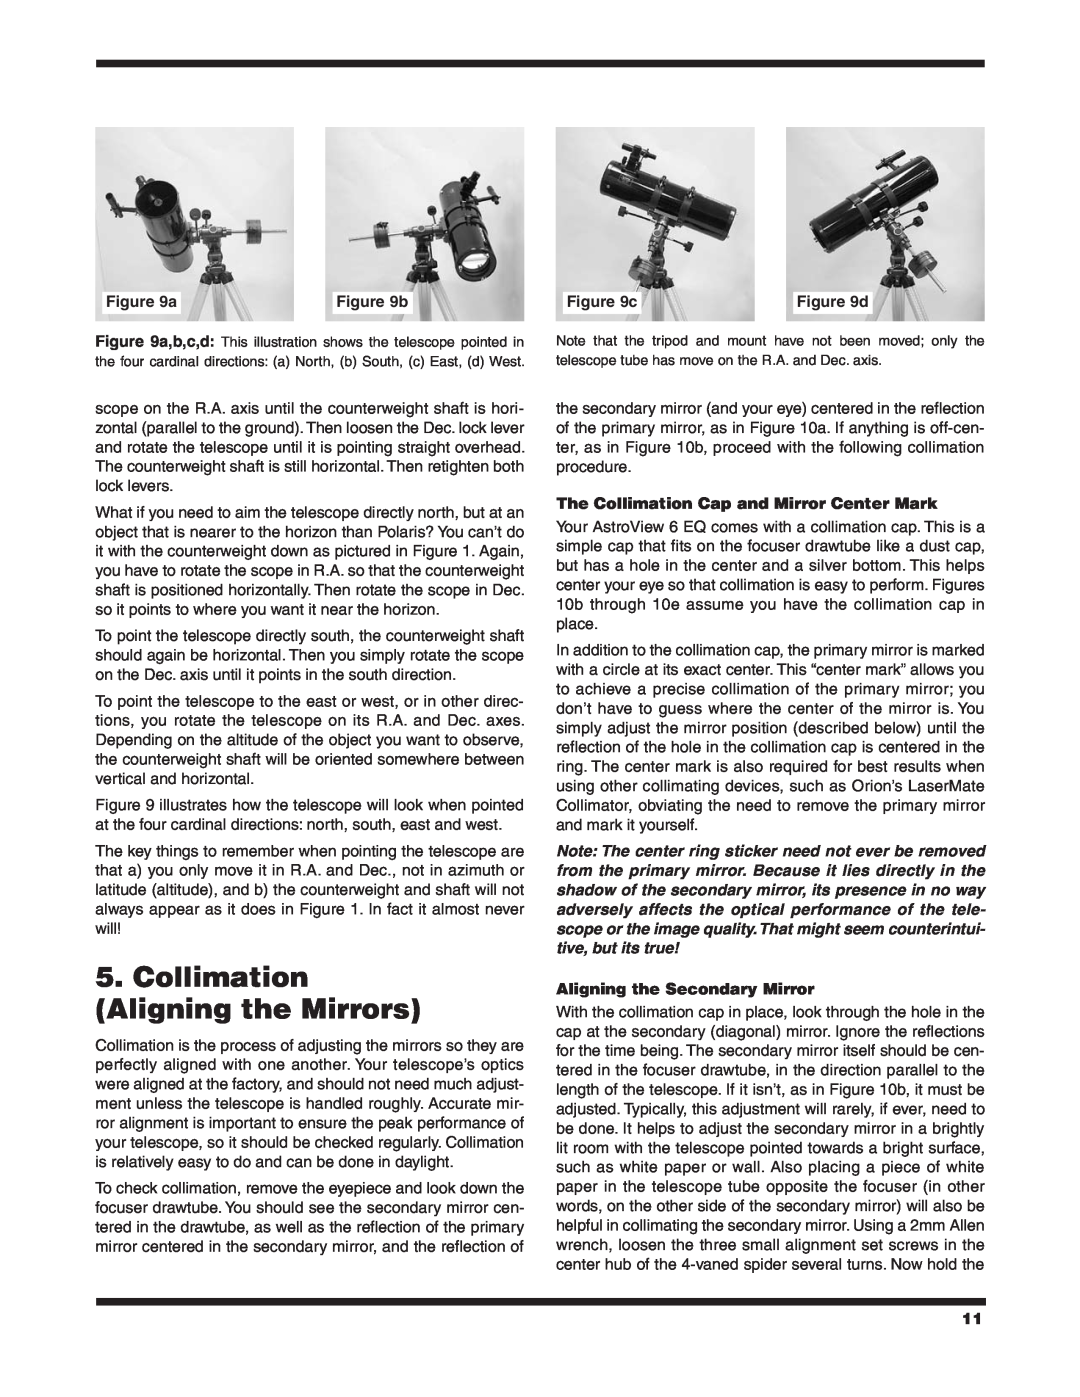 Orion 9827 instruction manual Collimation Aligning the Mirrors, b, The Collimation Cap and Mirror Center Mark 